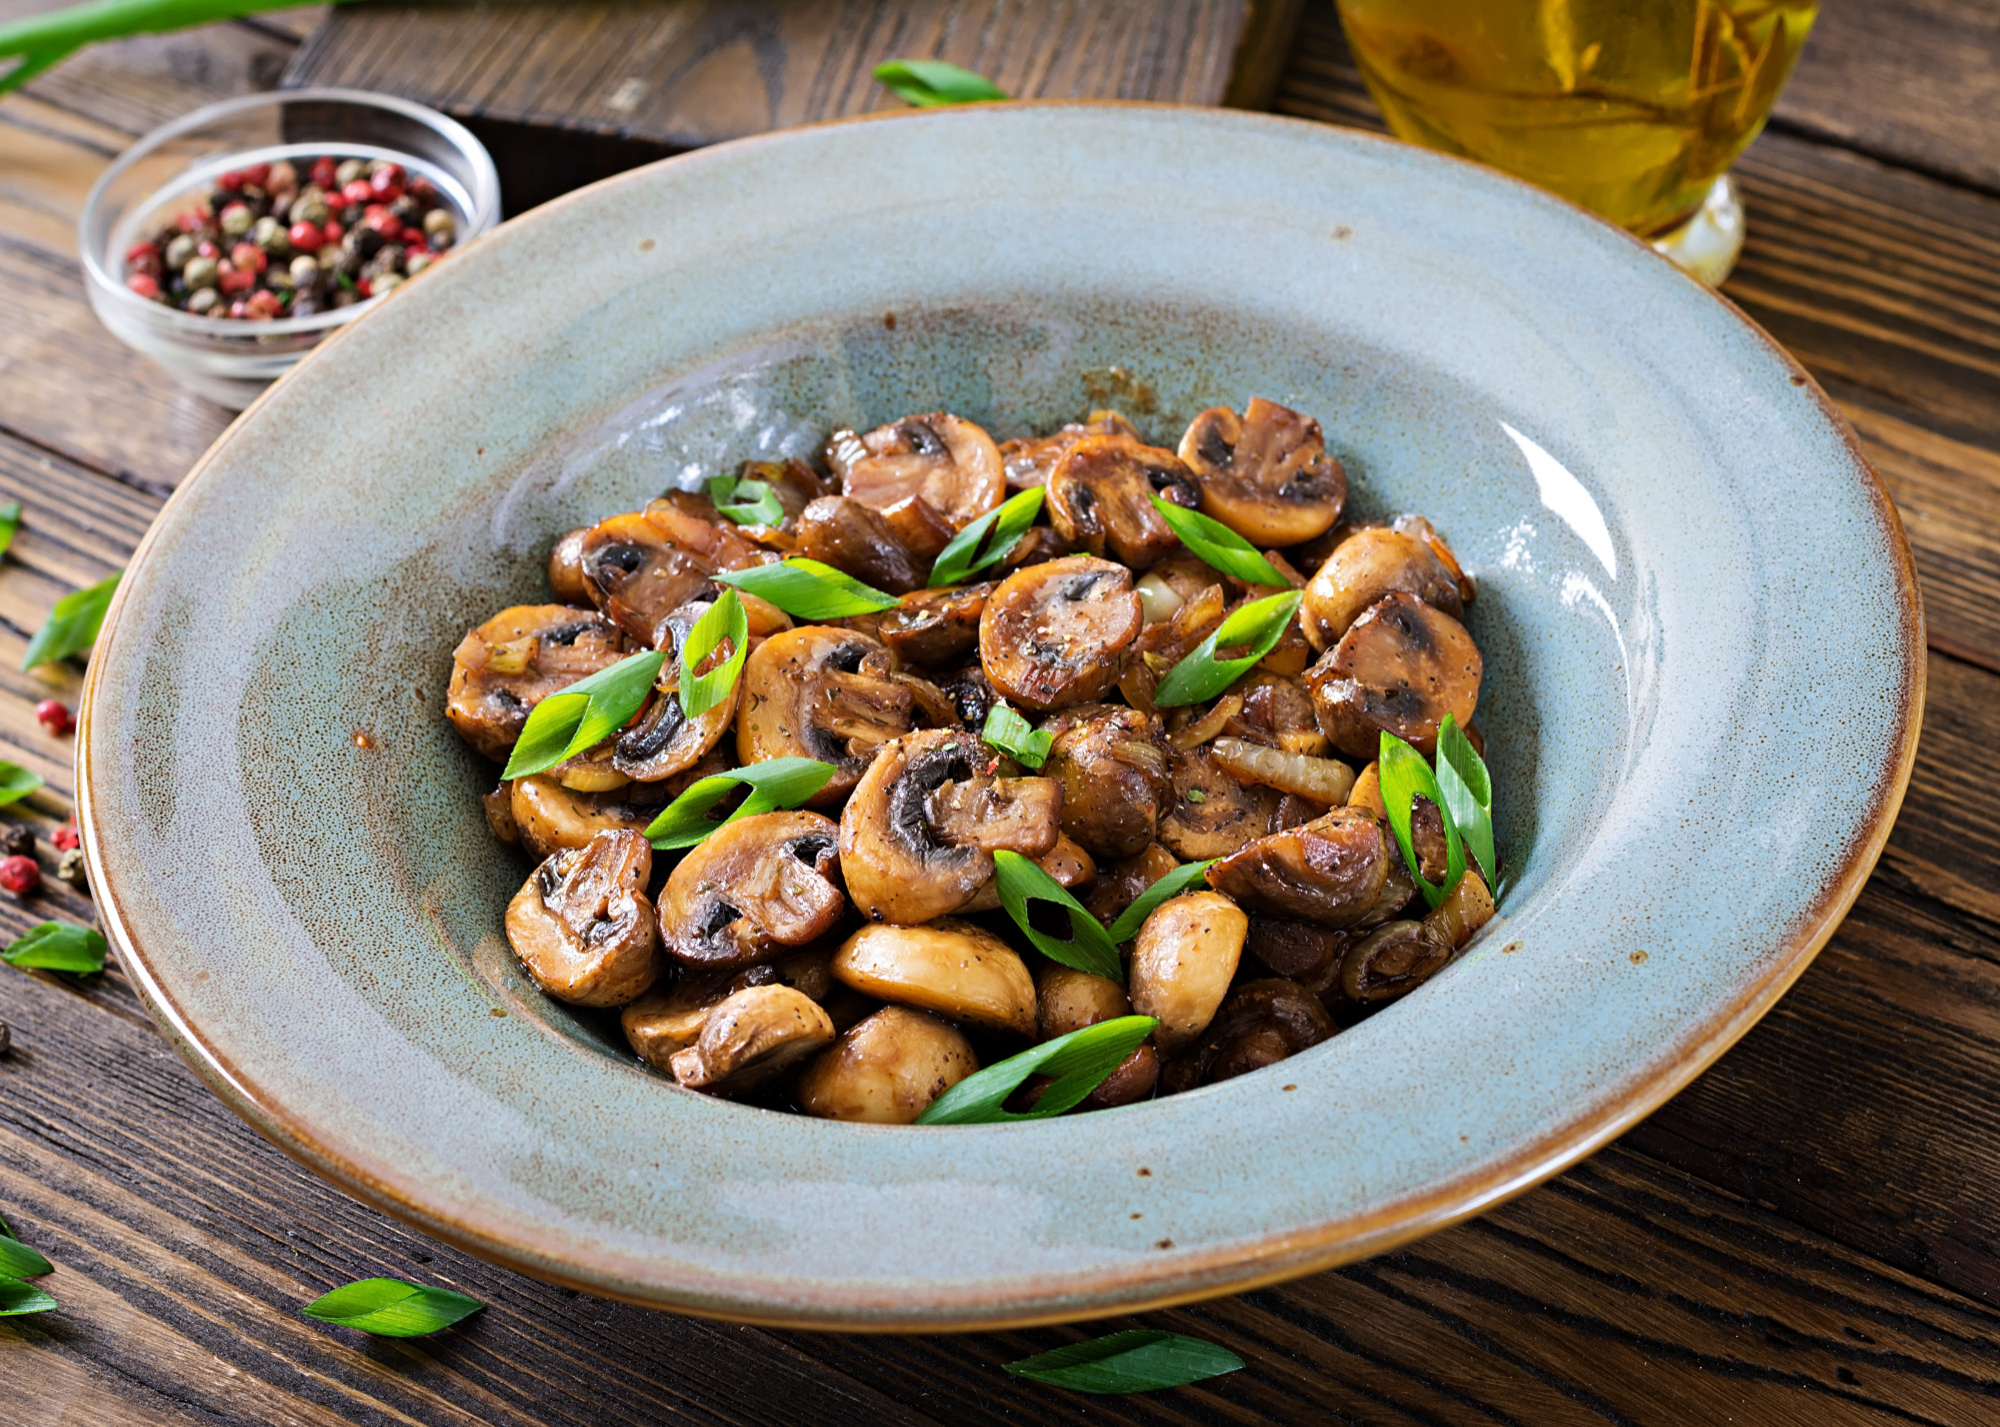 A plate of baked mushrooms with soy sauce and herbs | Source: Freepik